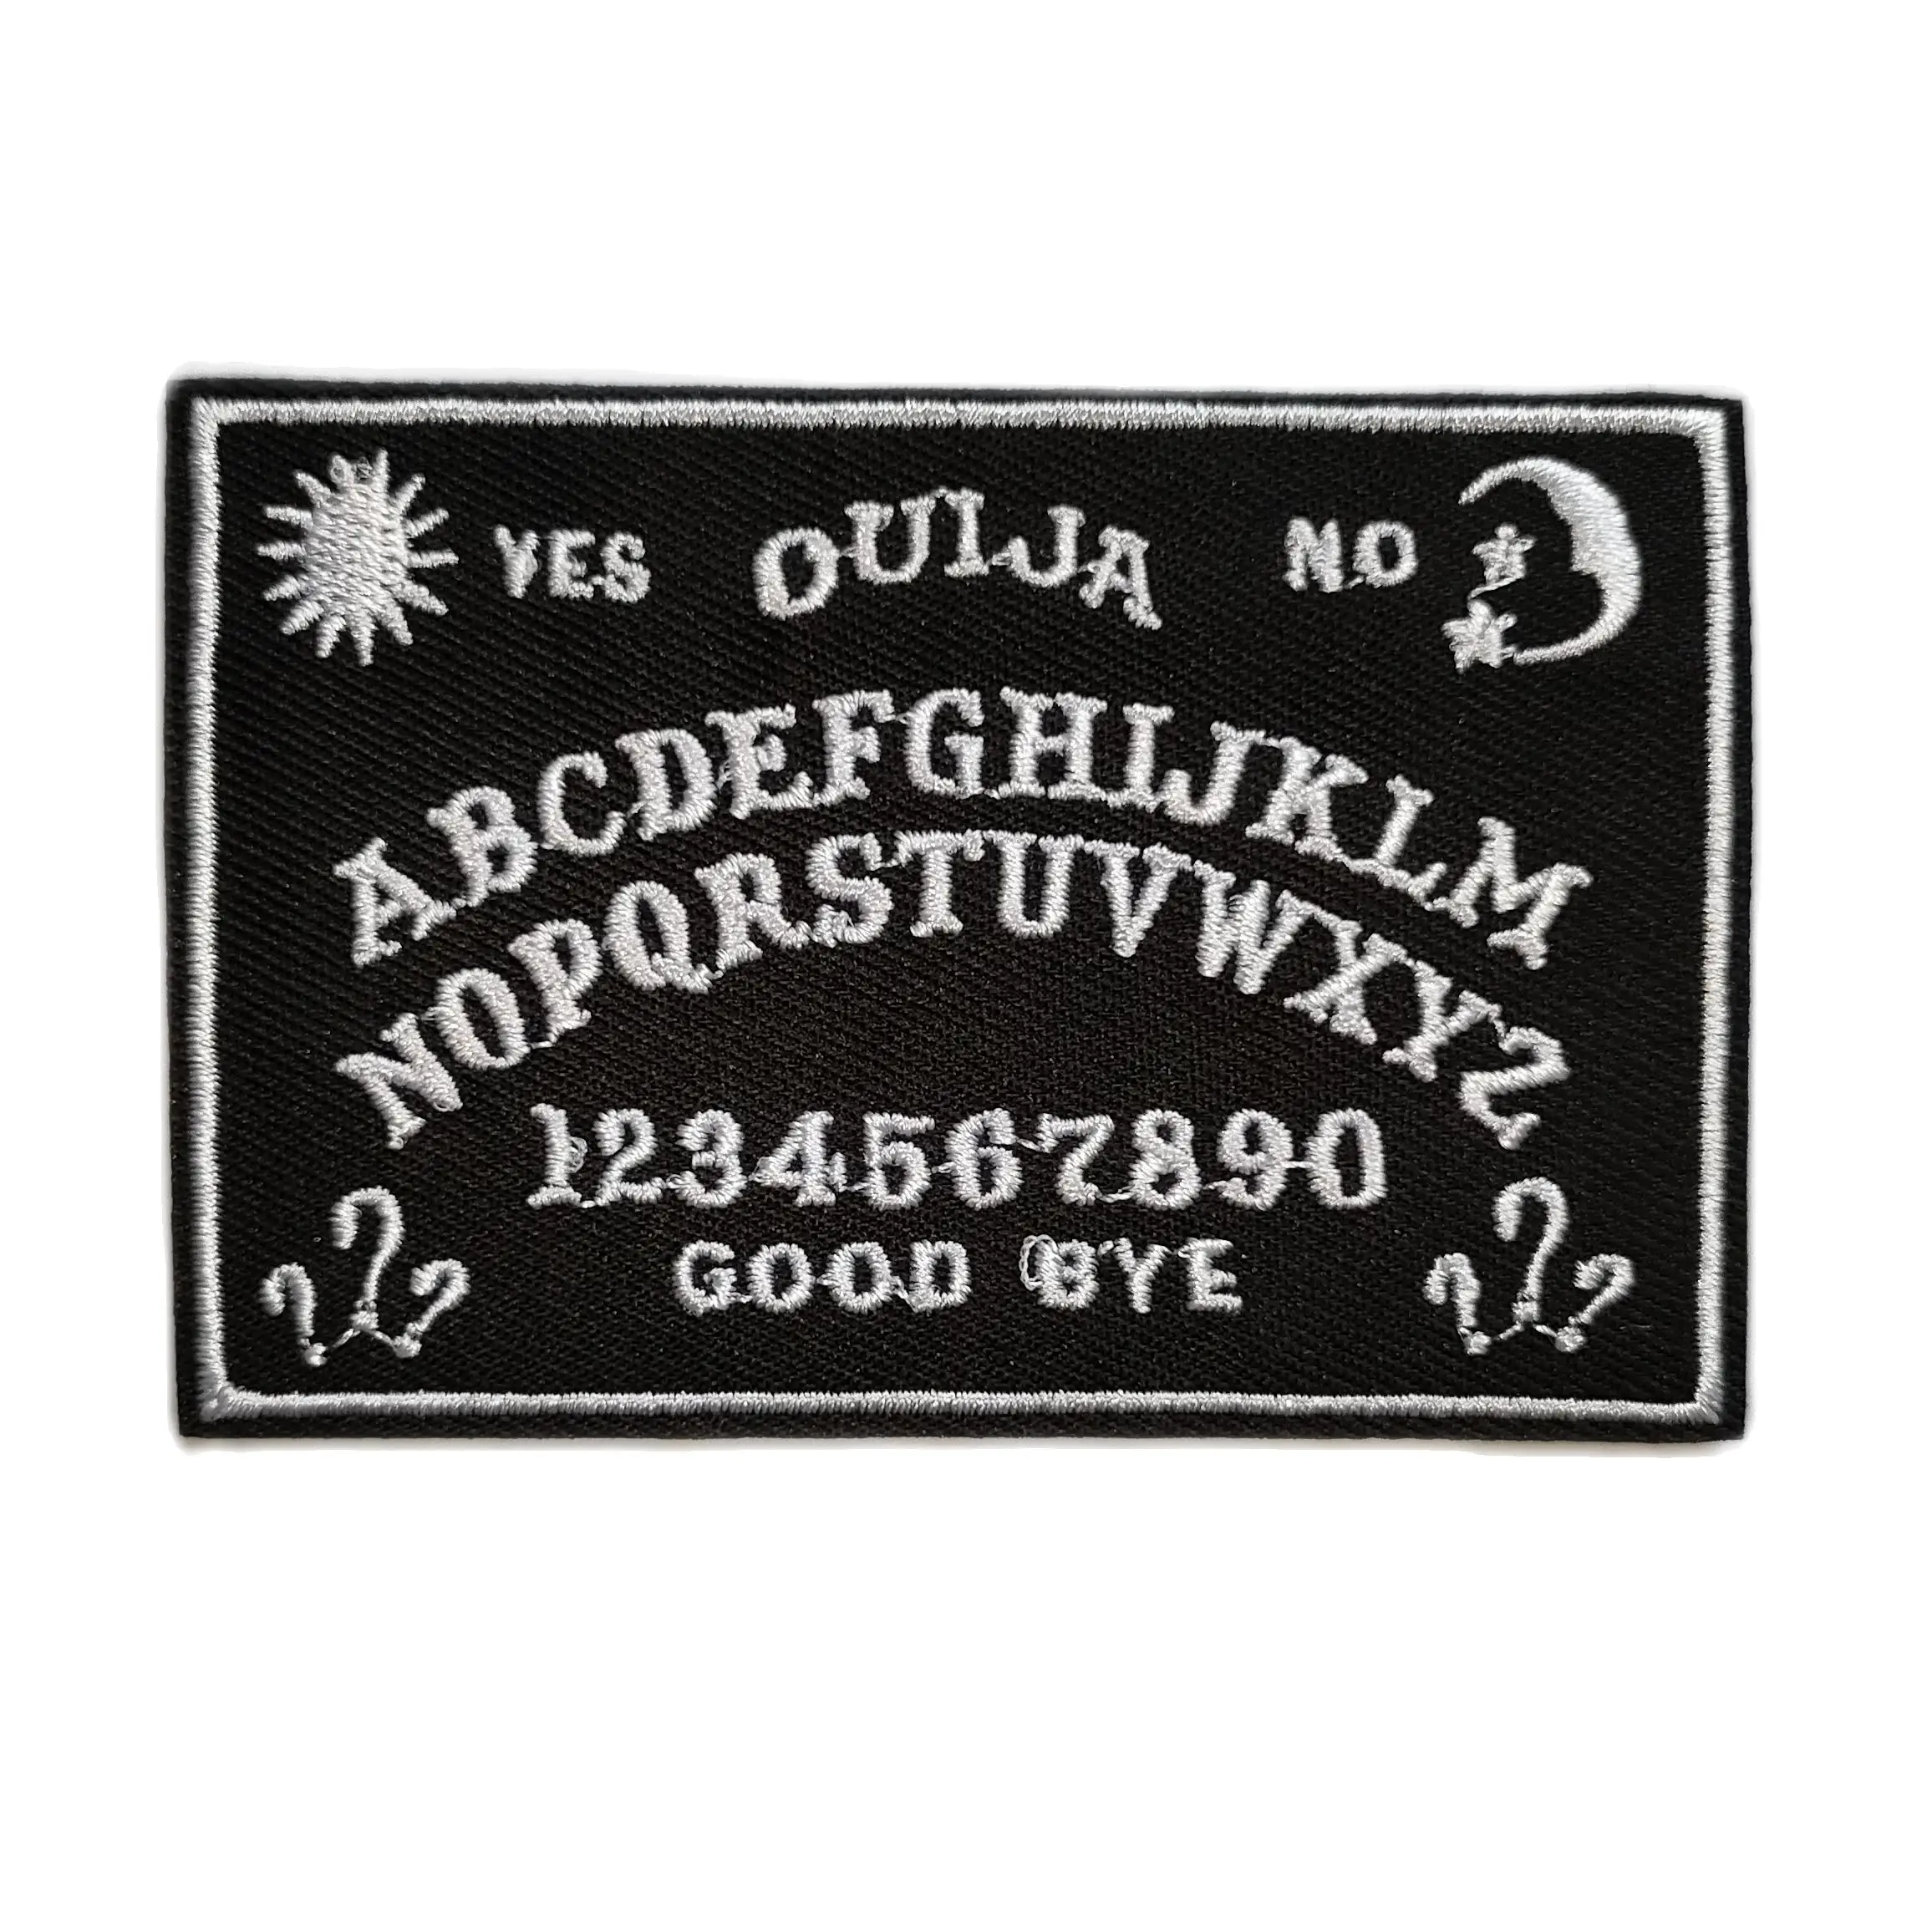 

Ouija Board Easy Iron On Patch Sew black white Goth Pagan Mystic Wicca Spooky Witchy Occult Withcraft Applique